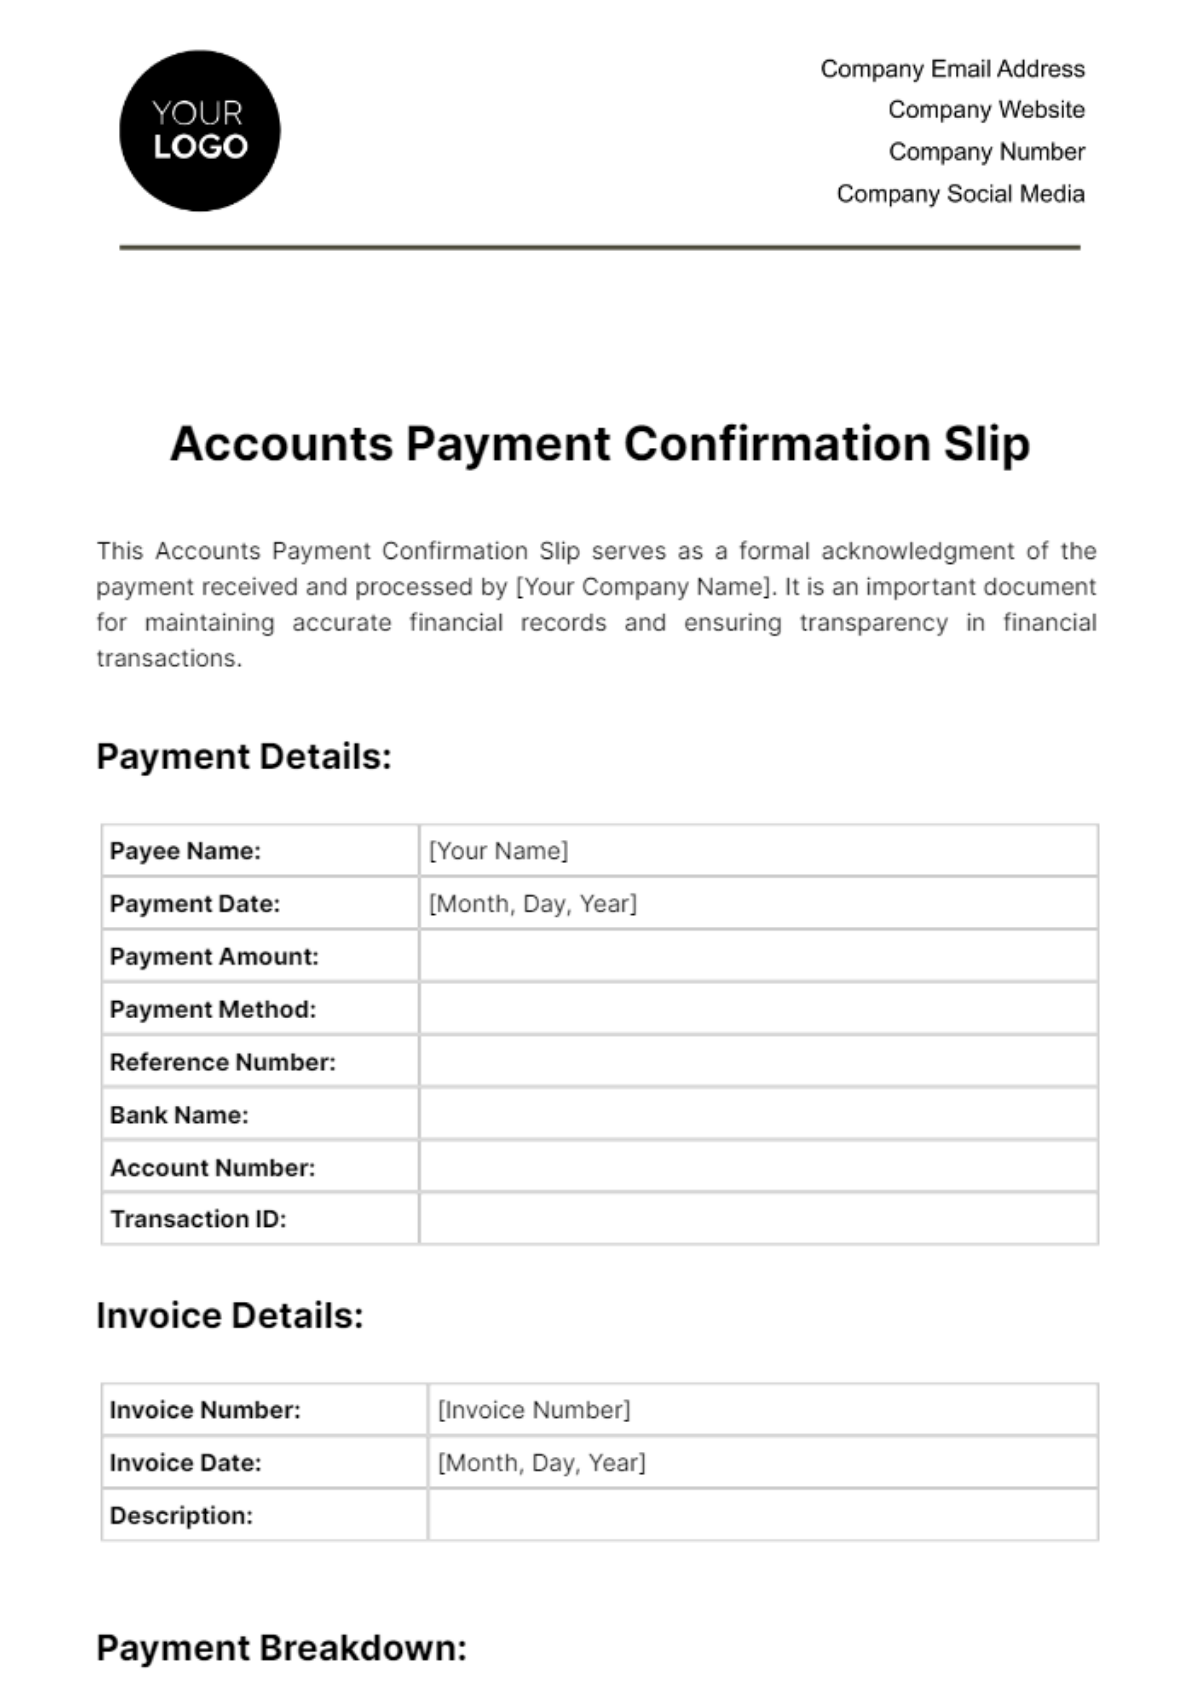 Accounts Payment Confirmation Slip Template